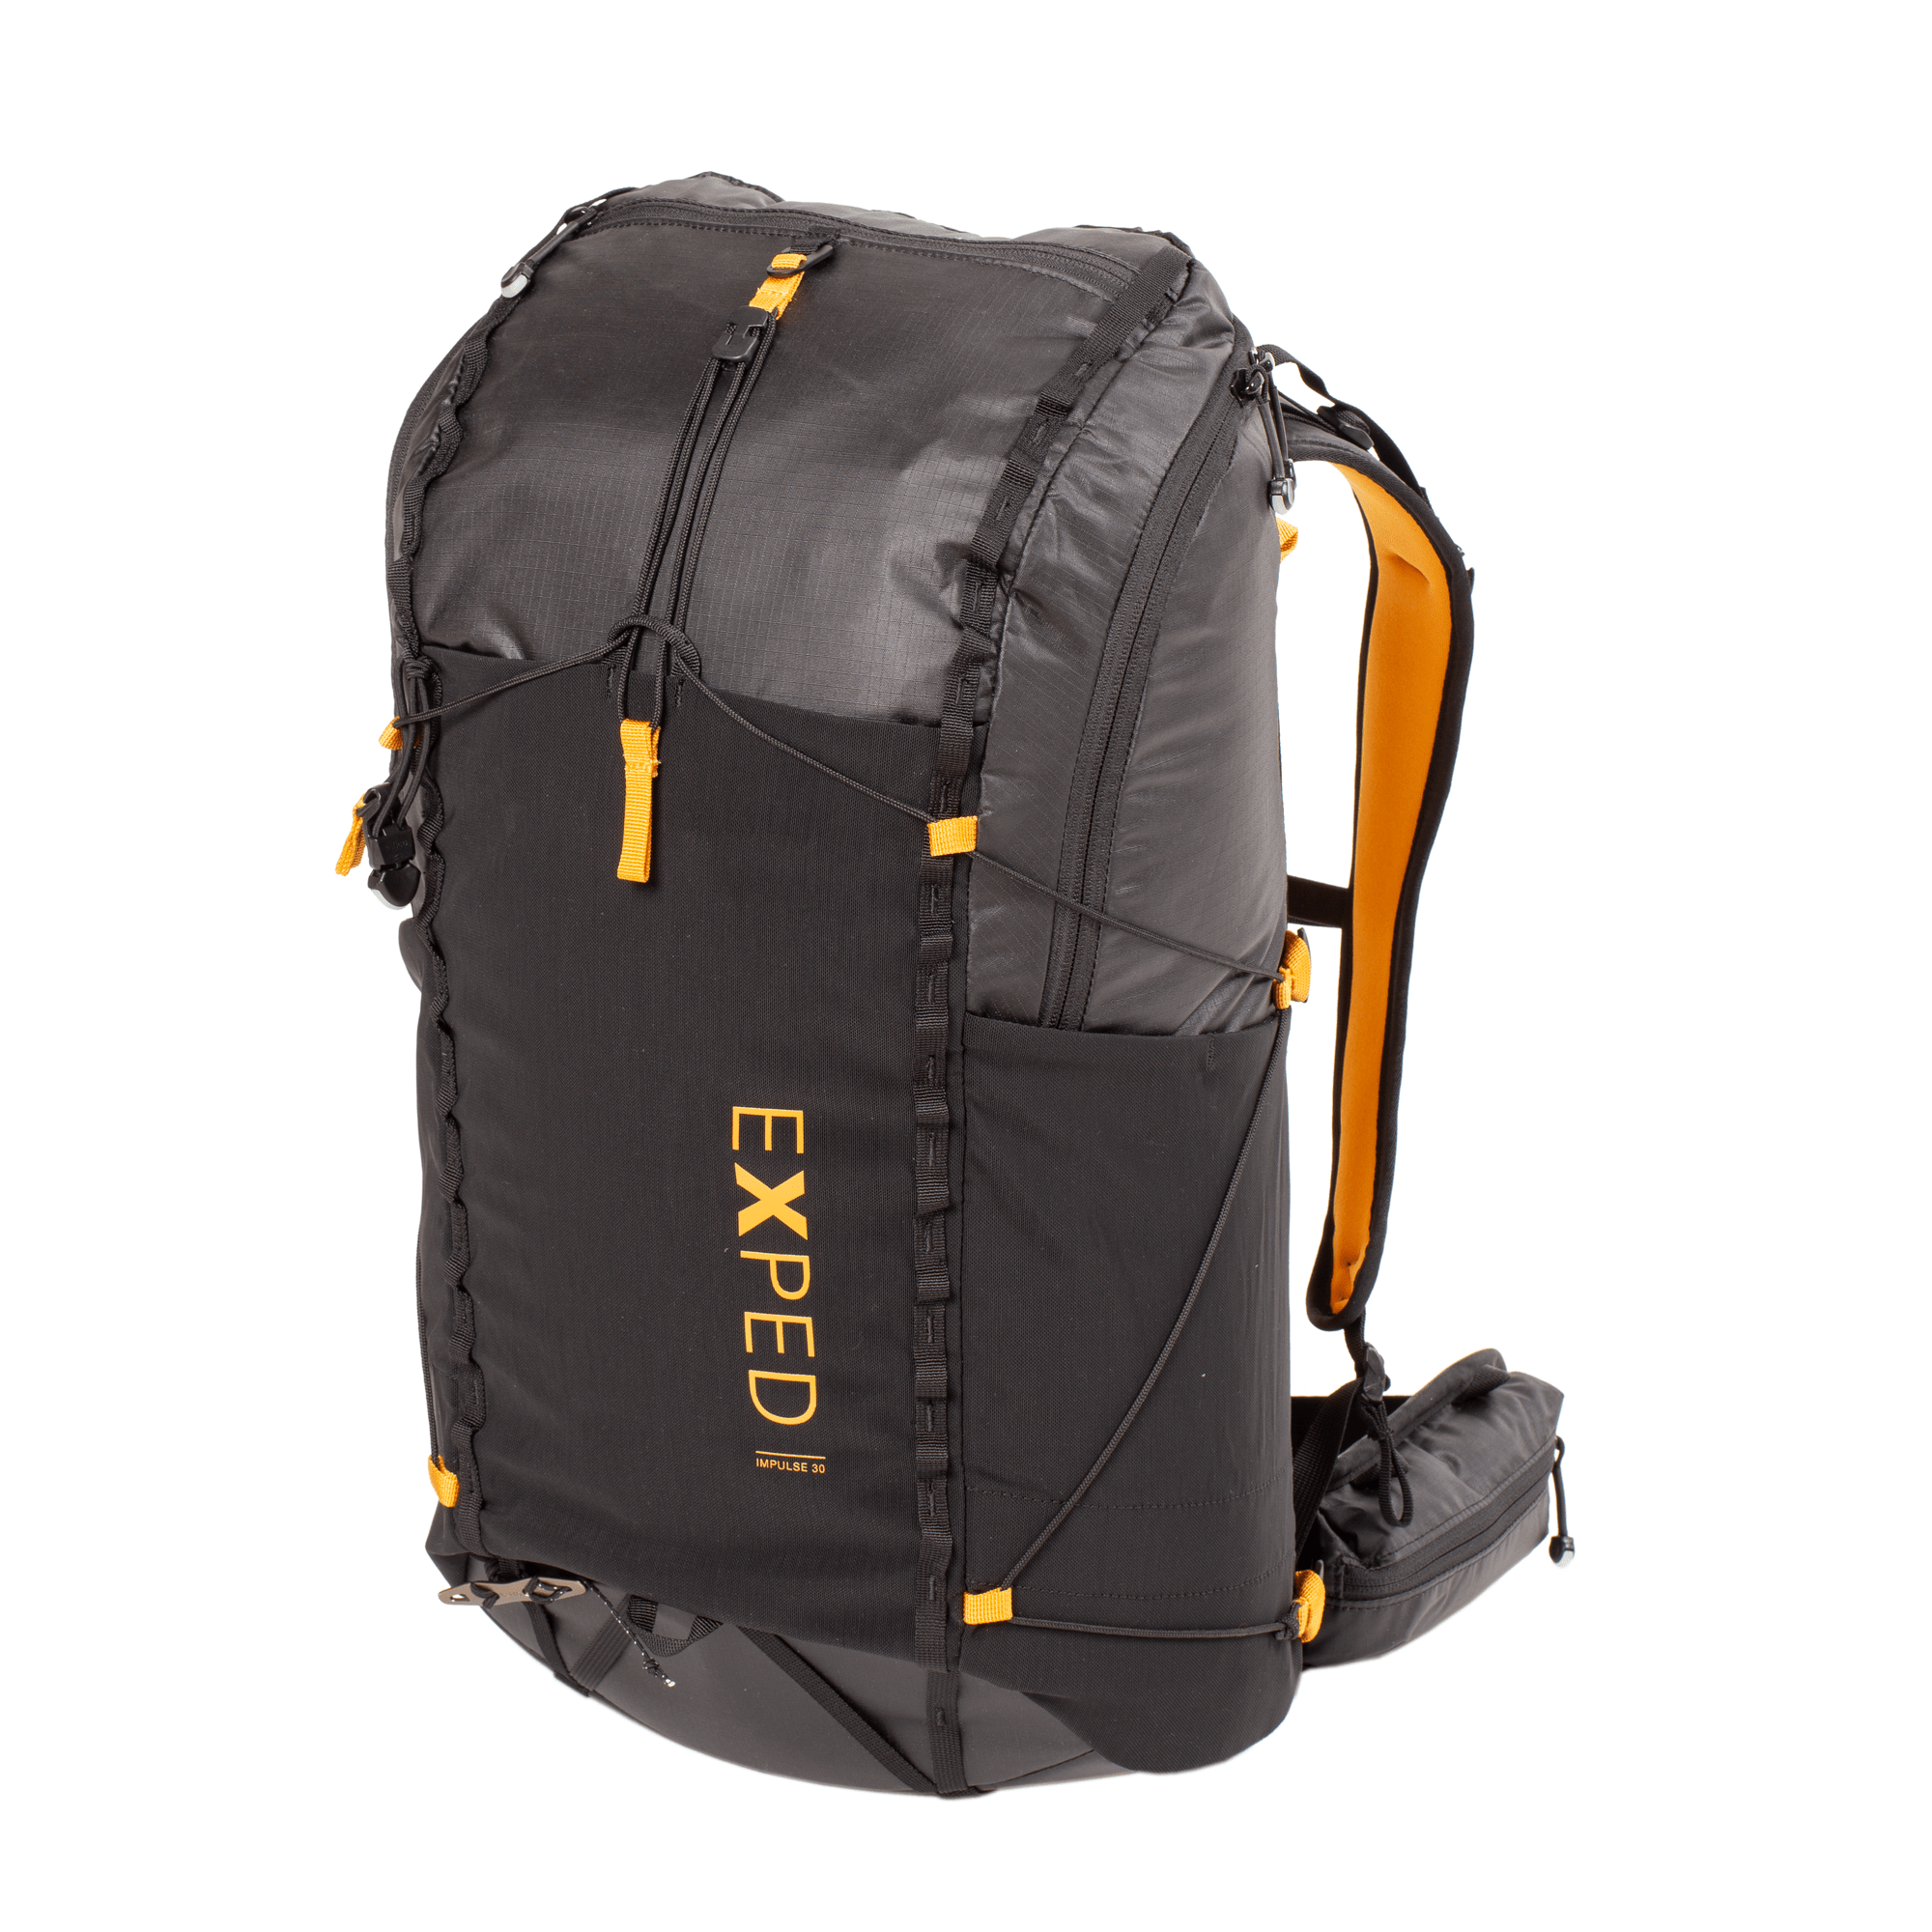 Impulse Sling Bag Large - Image One Camera and Video